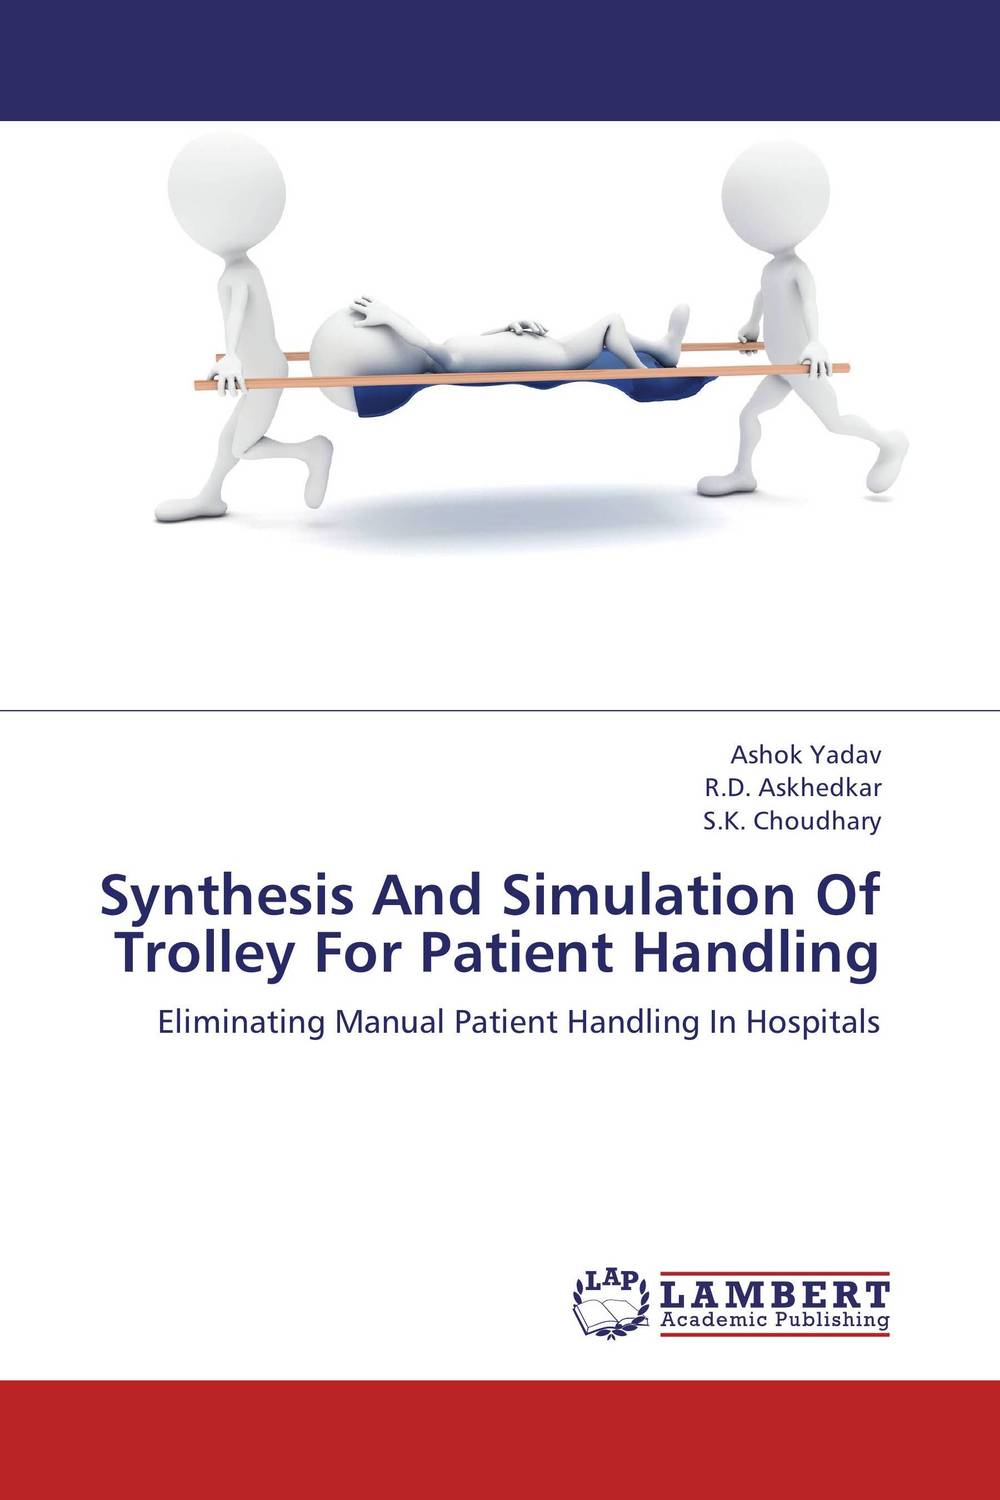 Synthesis And Simulation Of Trolley For Patient Handling